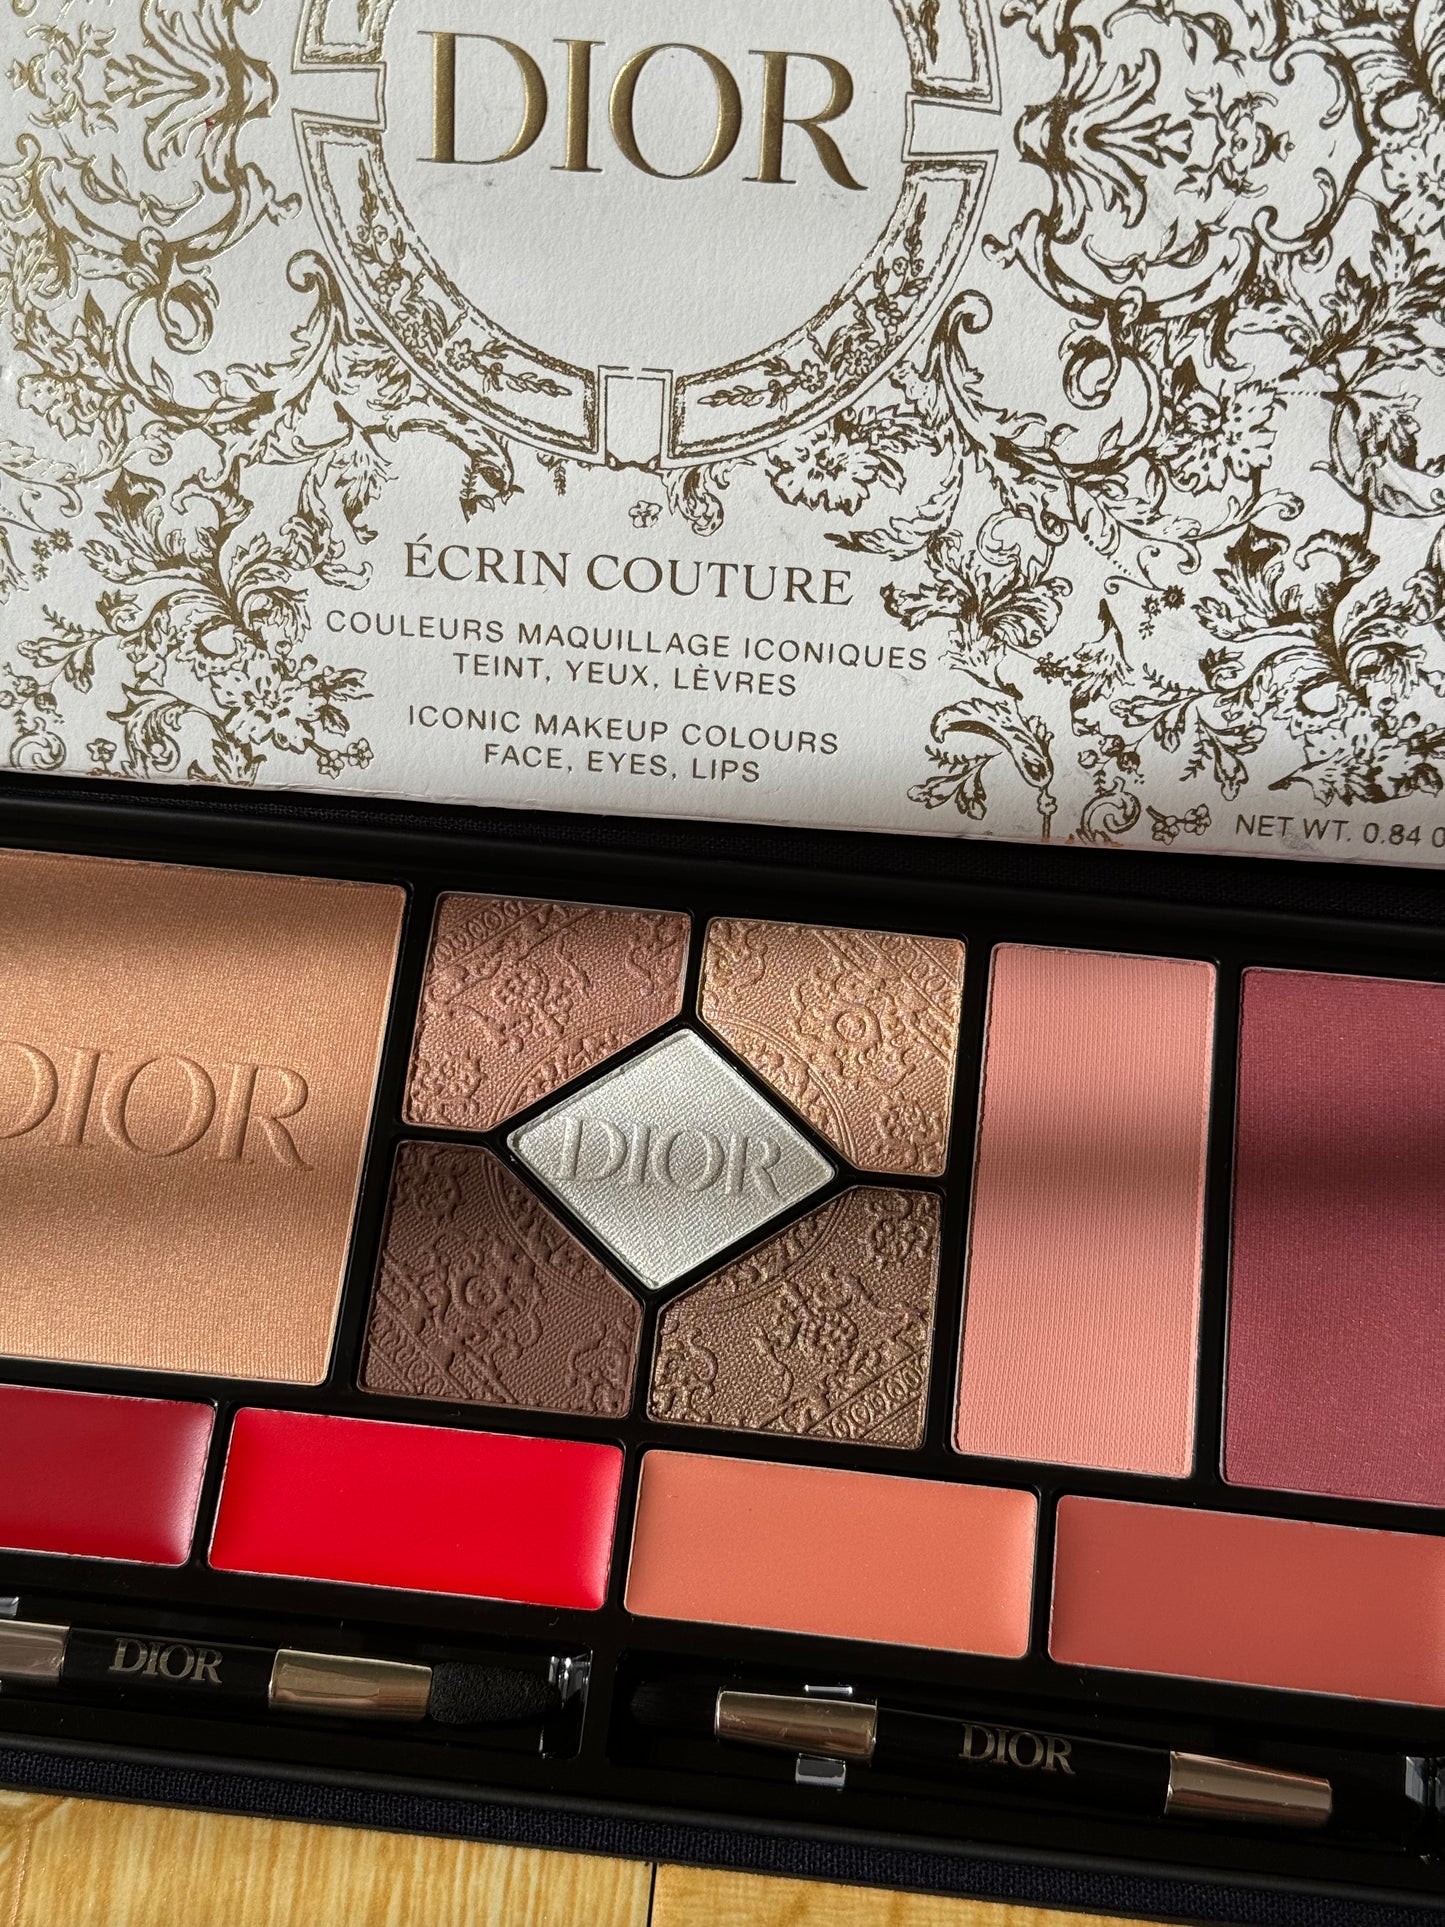 Dior all in one set